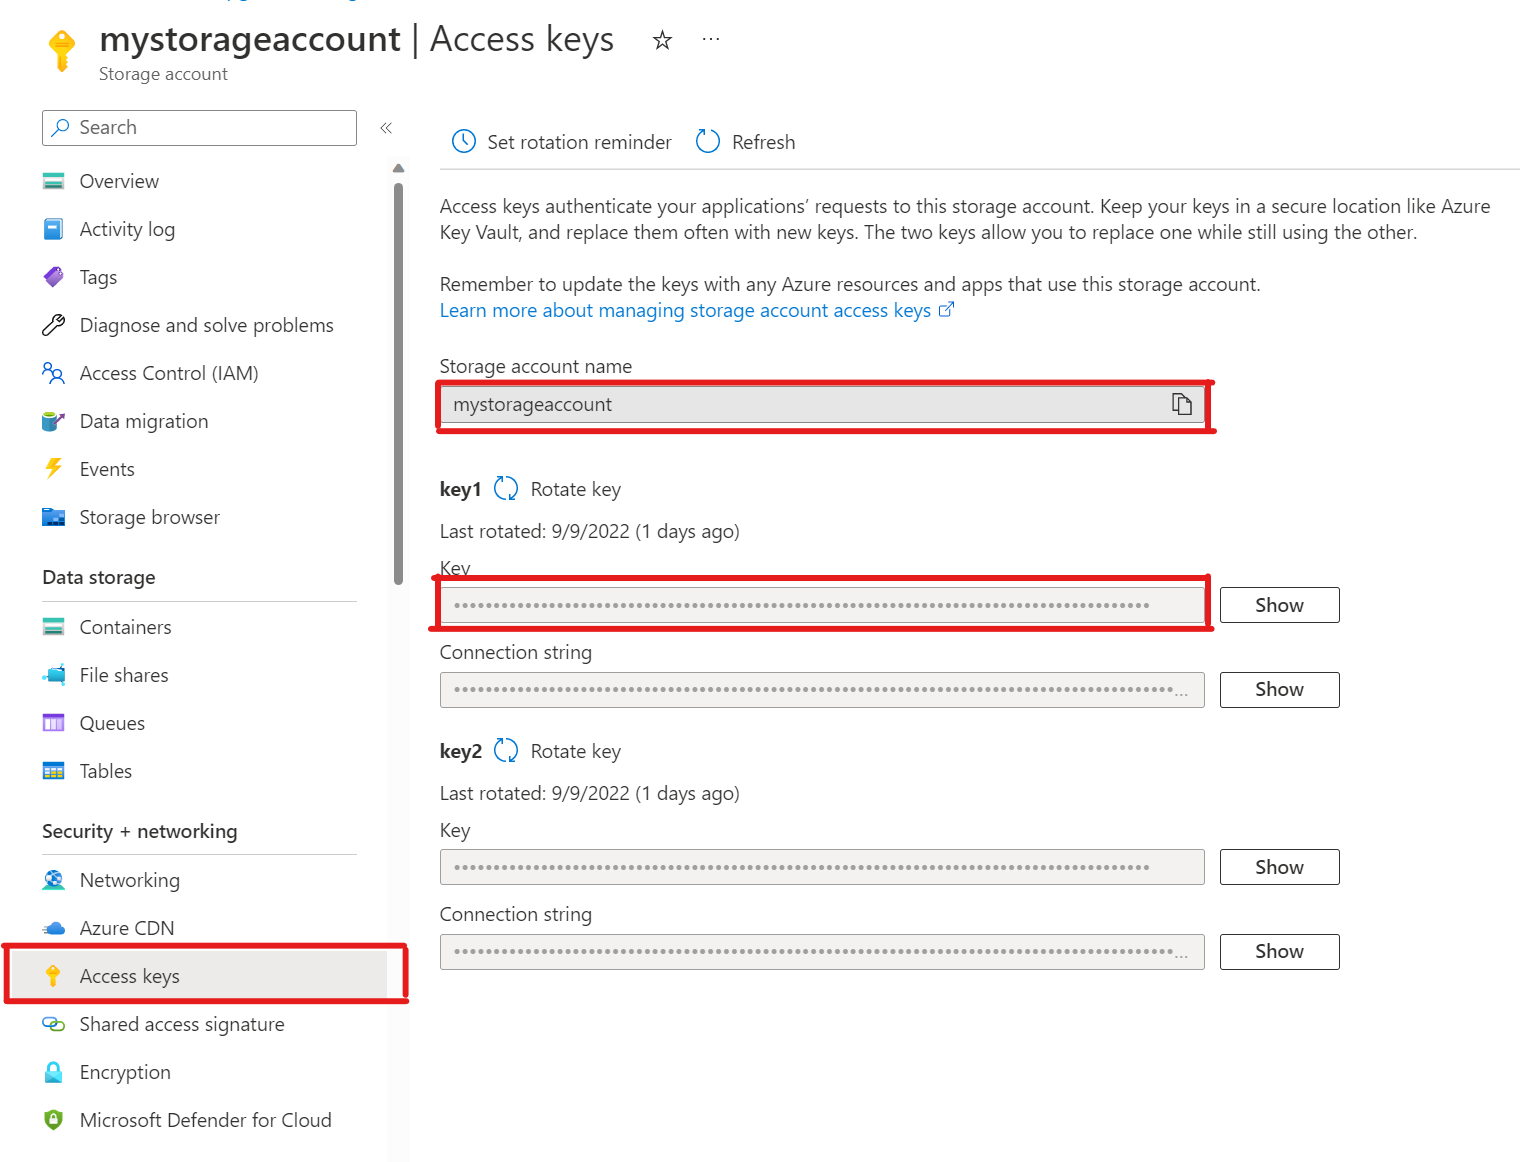 Screenshot of Security + networking > Access keys section of an Azure Blob Storage page in the Azure portal.